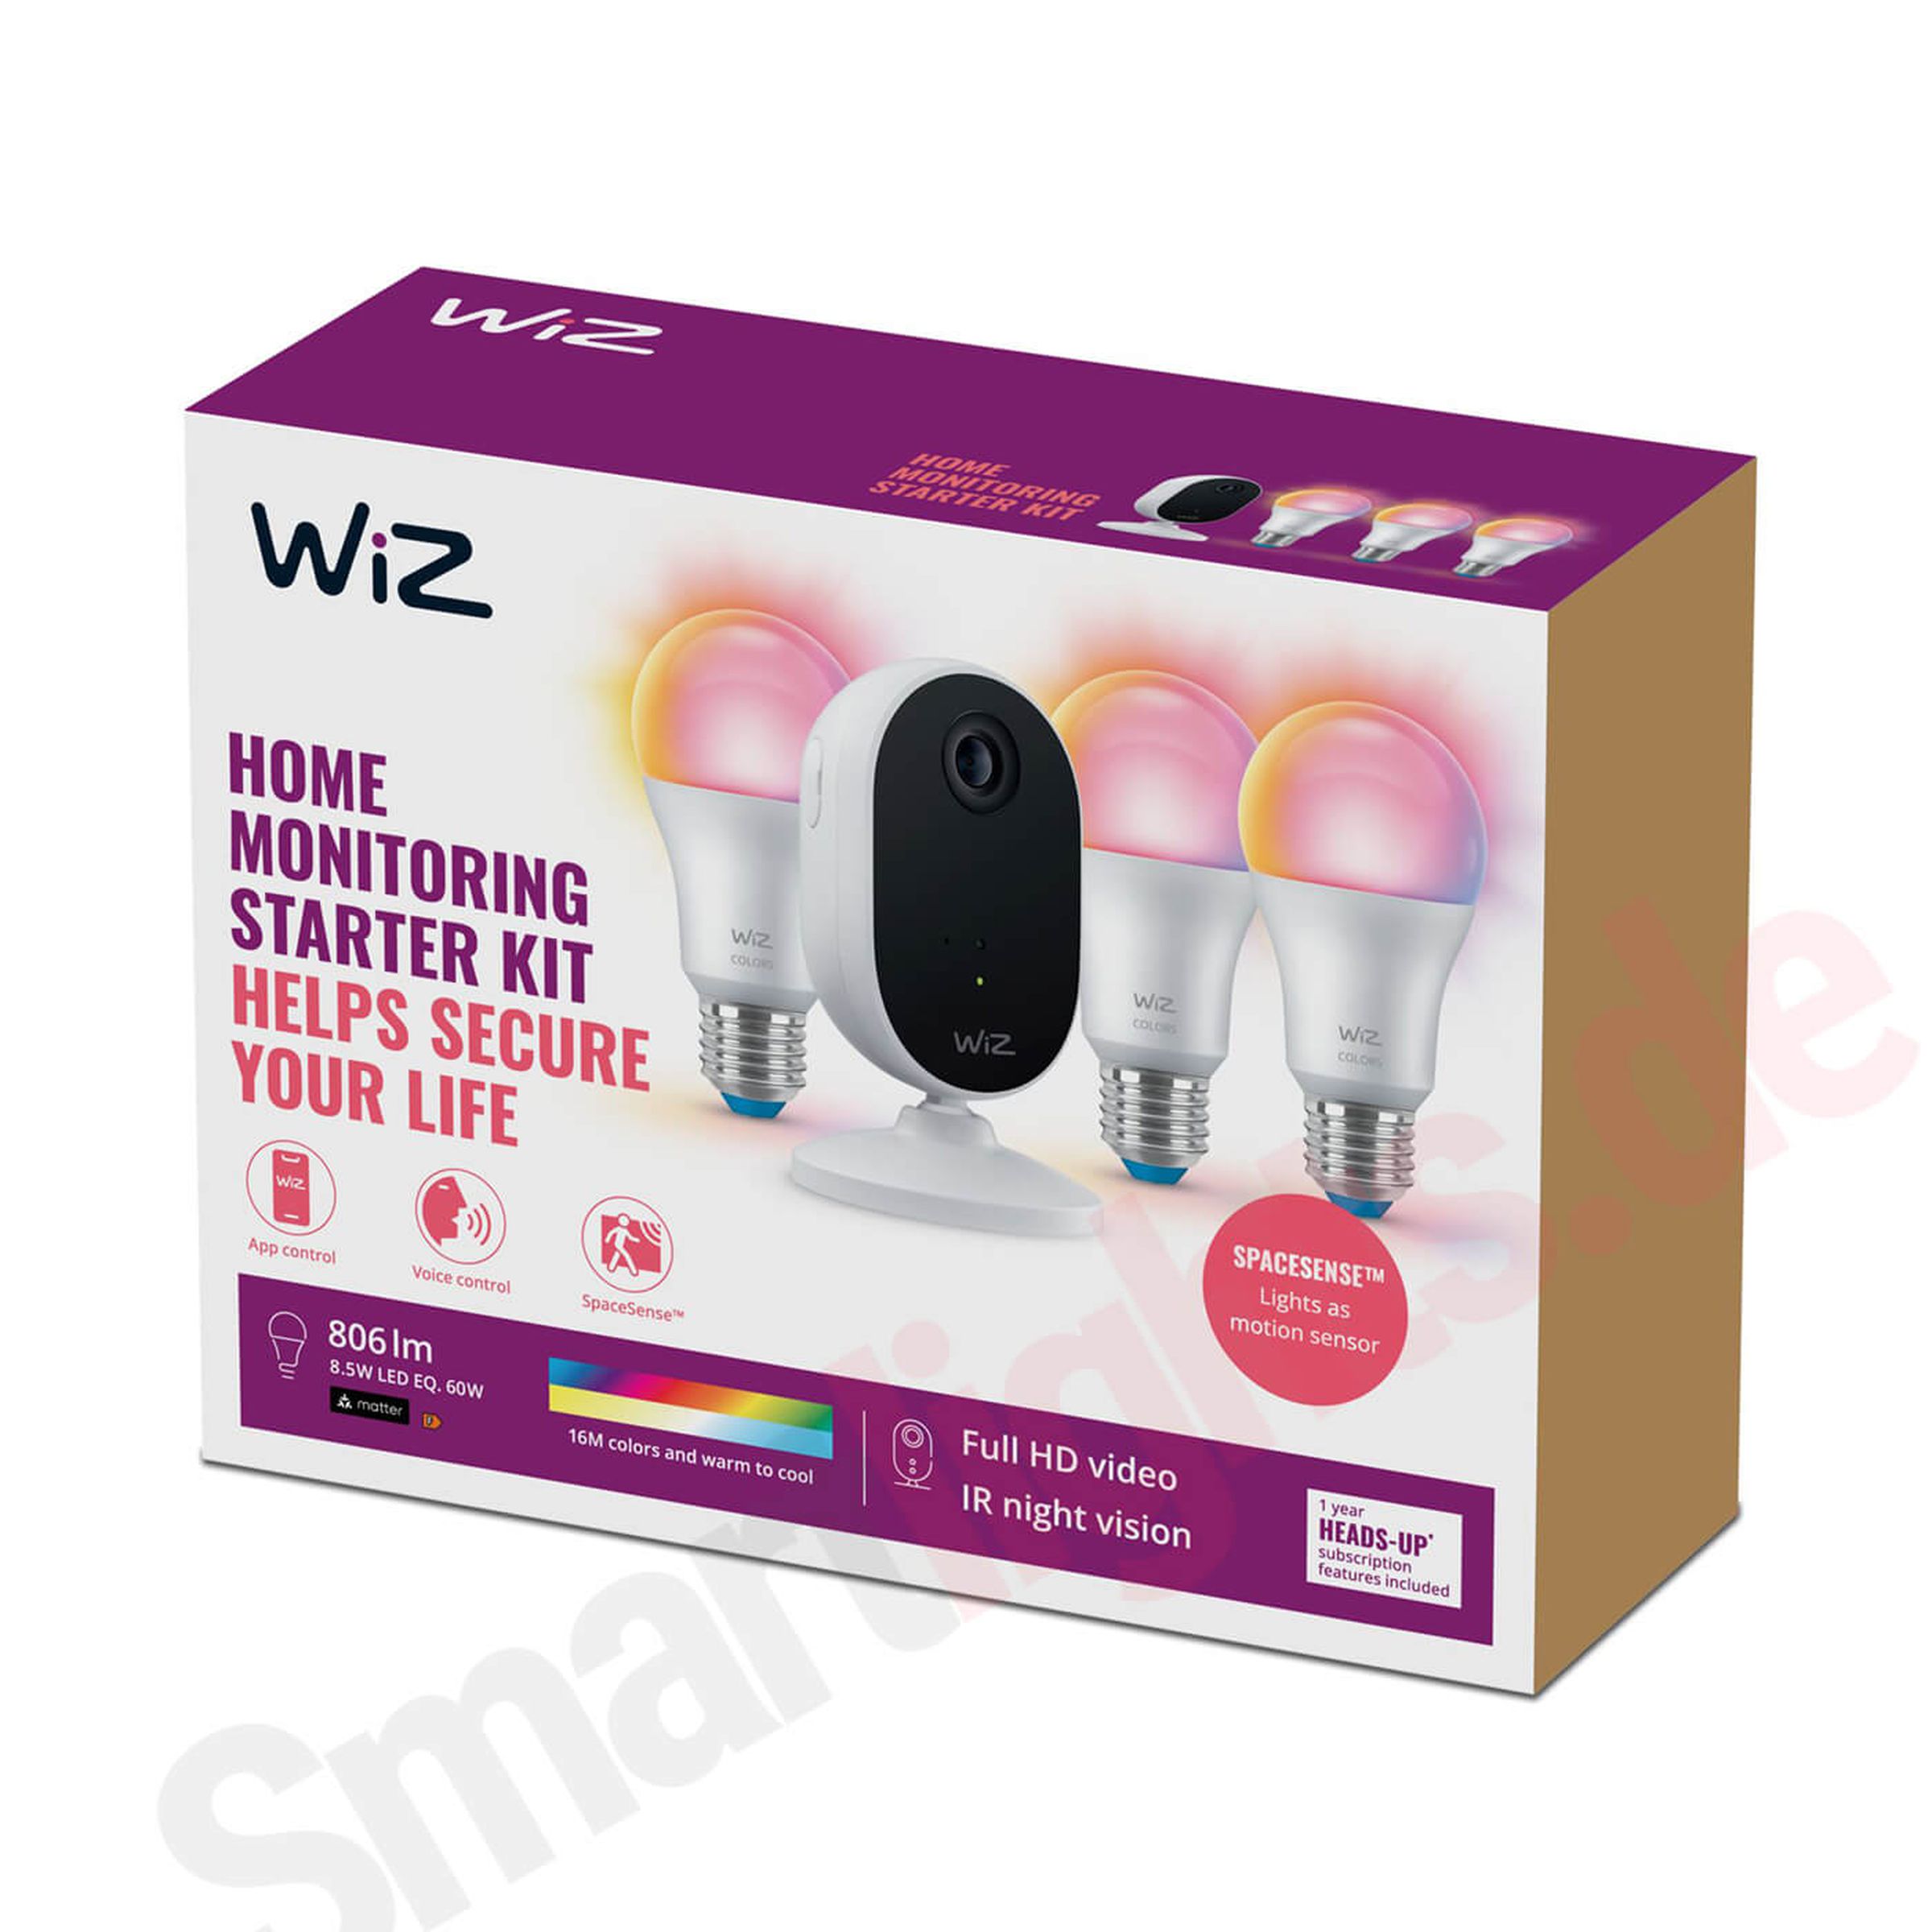 A product box showing WiZ smart bulbs and a smart security camera.